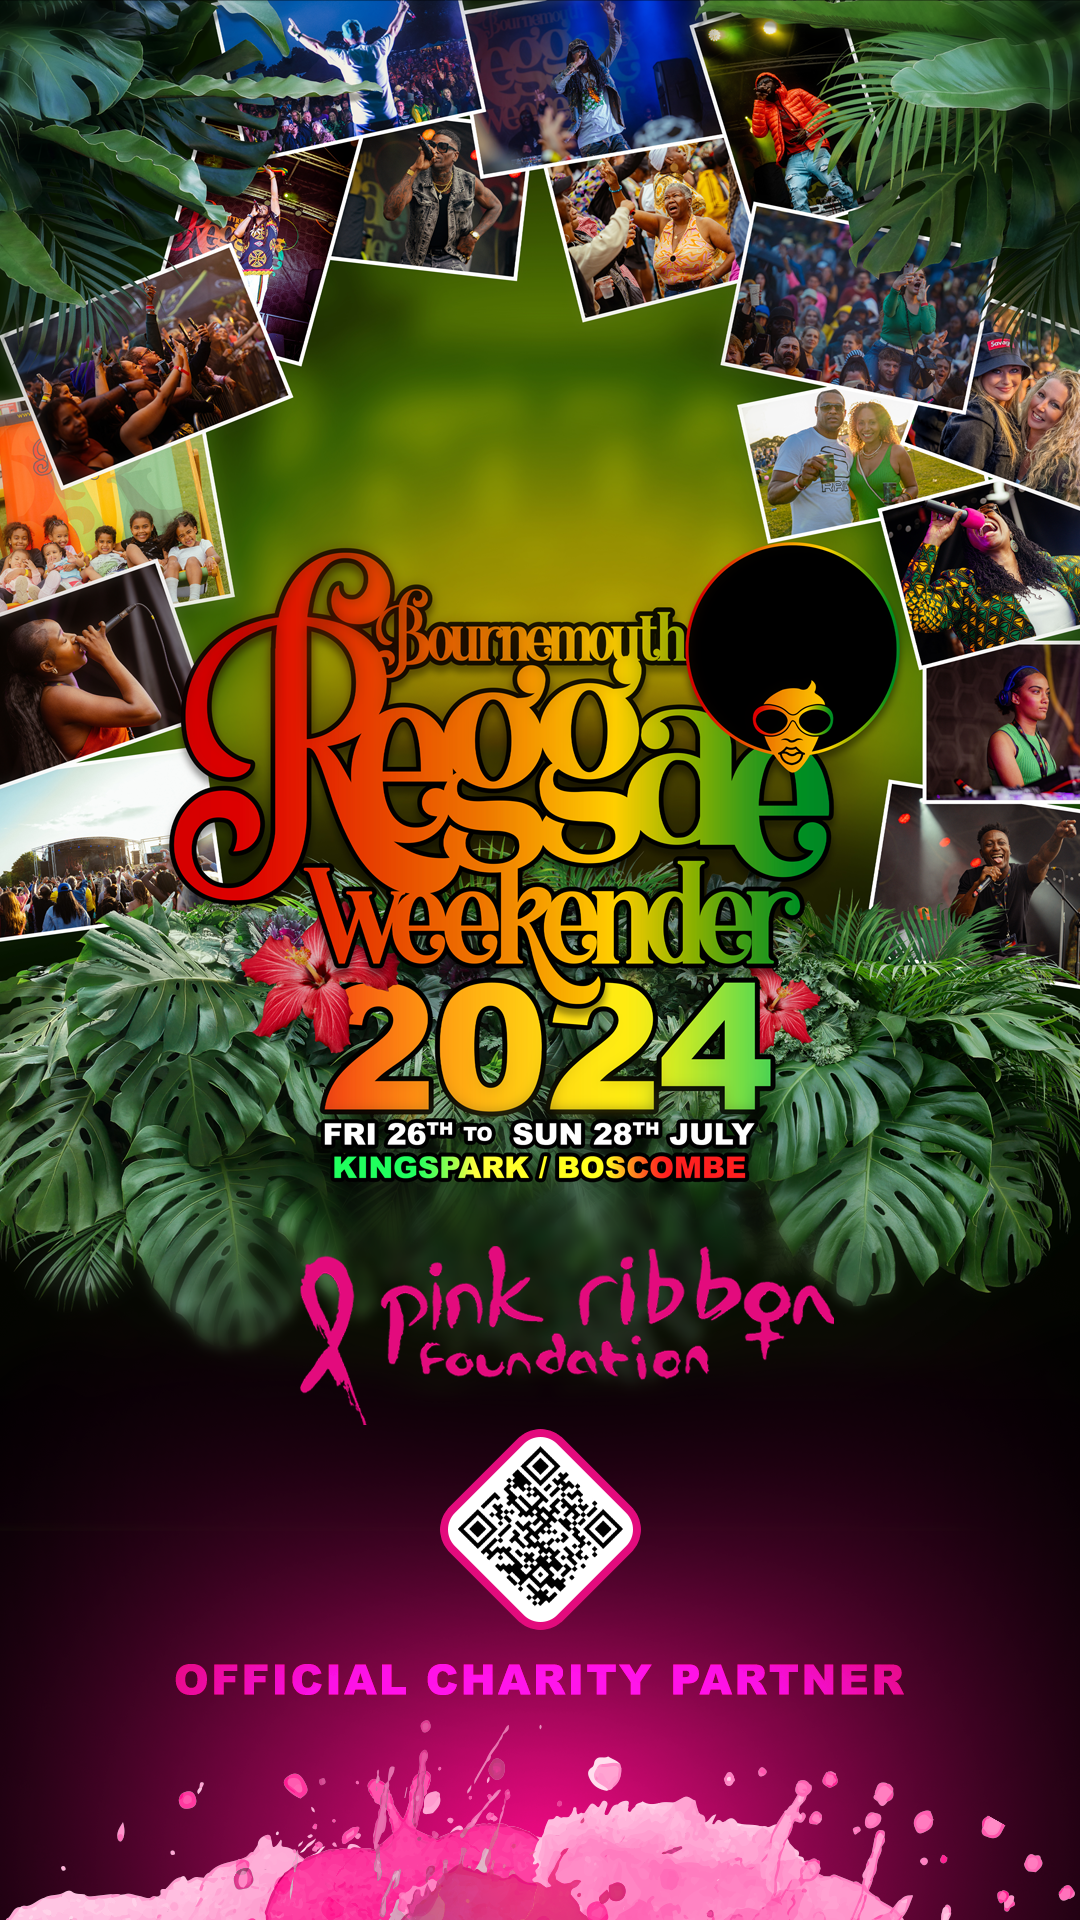 Bournemouth Reggae Weekender and the Pink Ribbon Foundation